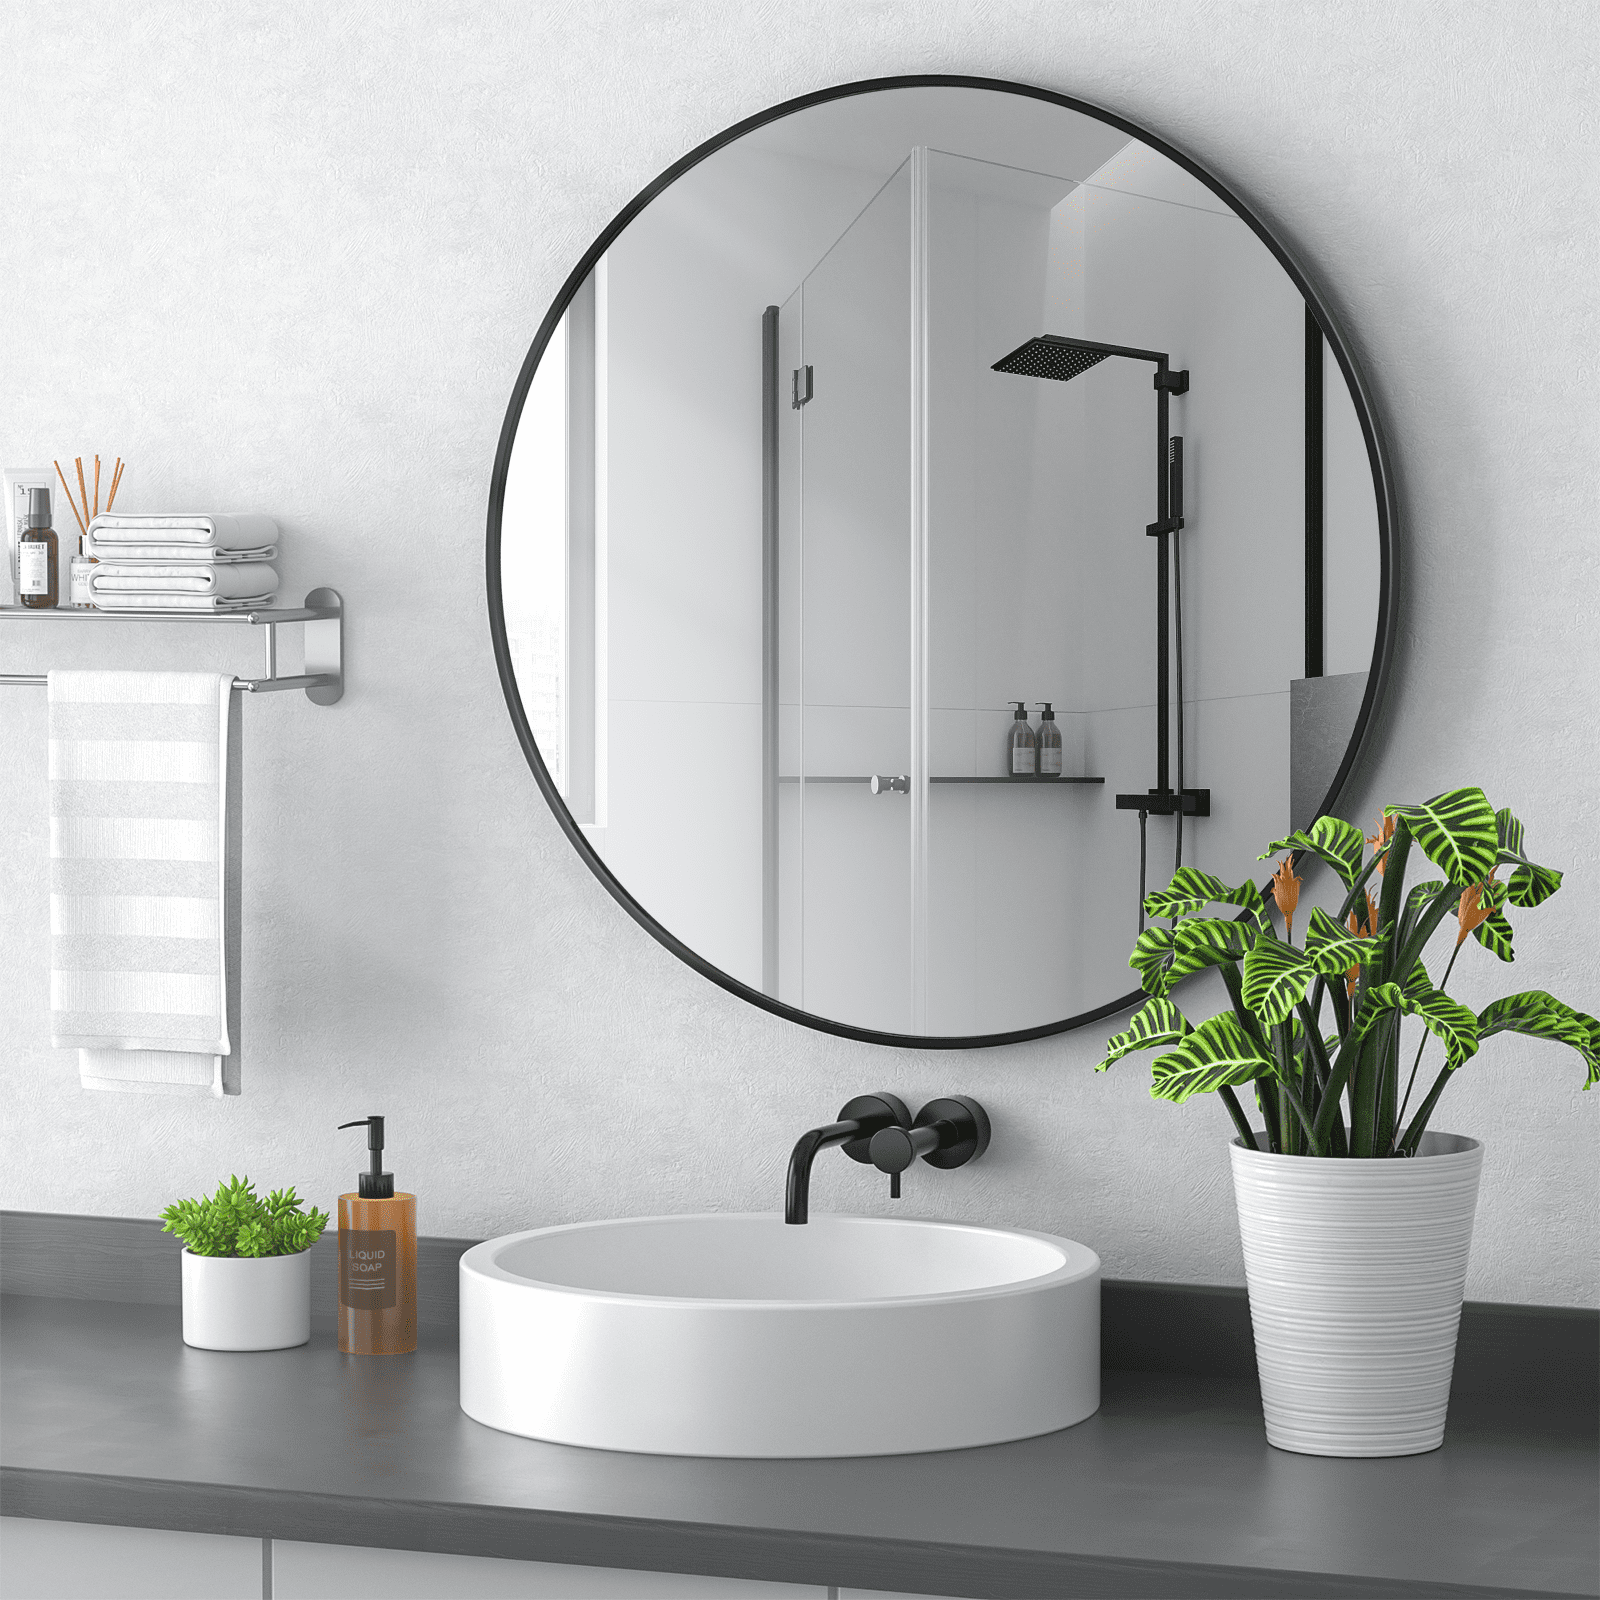 ATLums 24 Inch Black Round Mirror, Wall Mounted Circle Mirror with Metal  Frame, Suitable for Bathroom, Vanity, Entryway, Living Room, Wall Decor